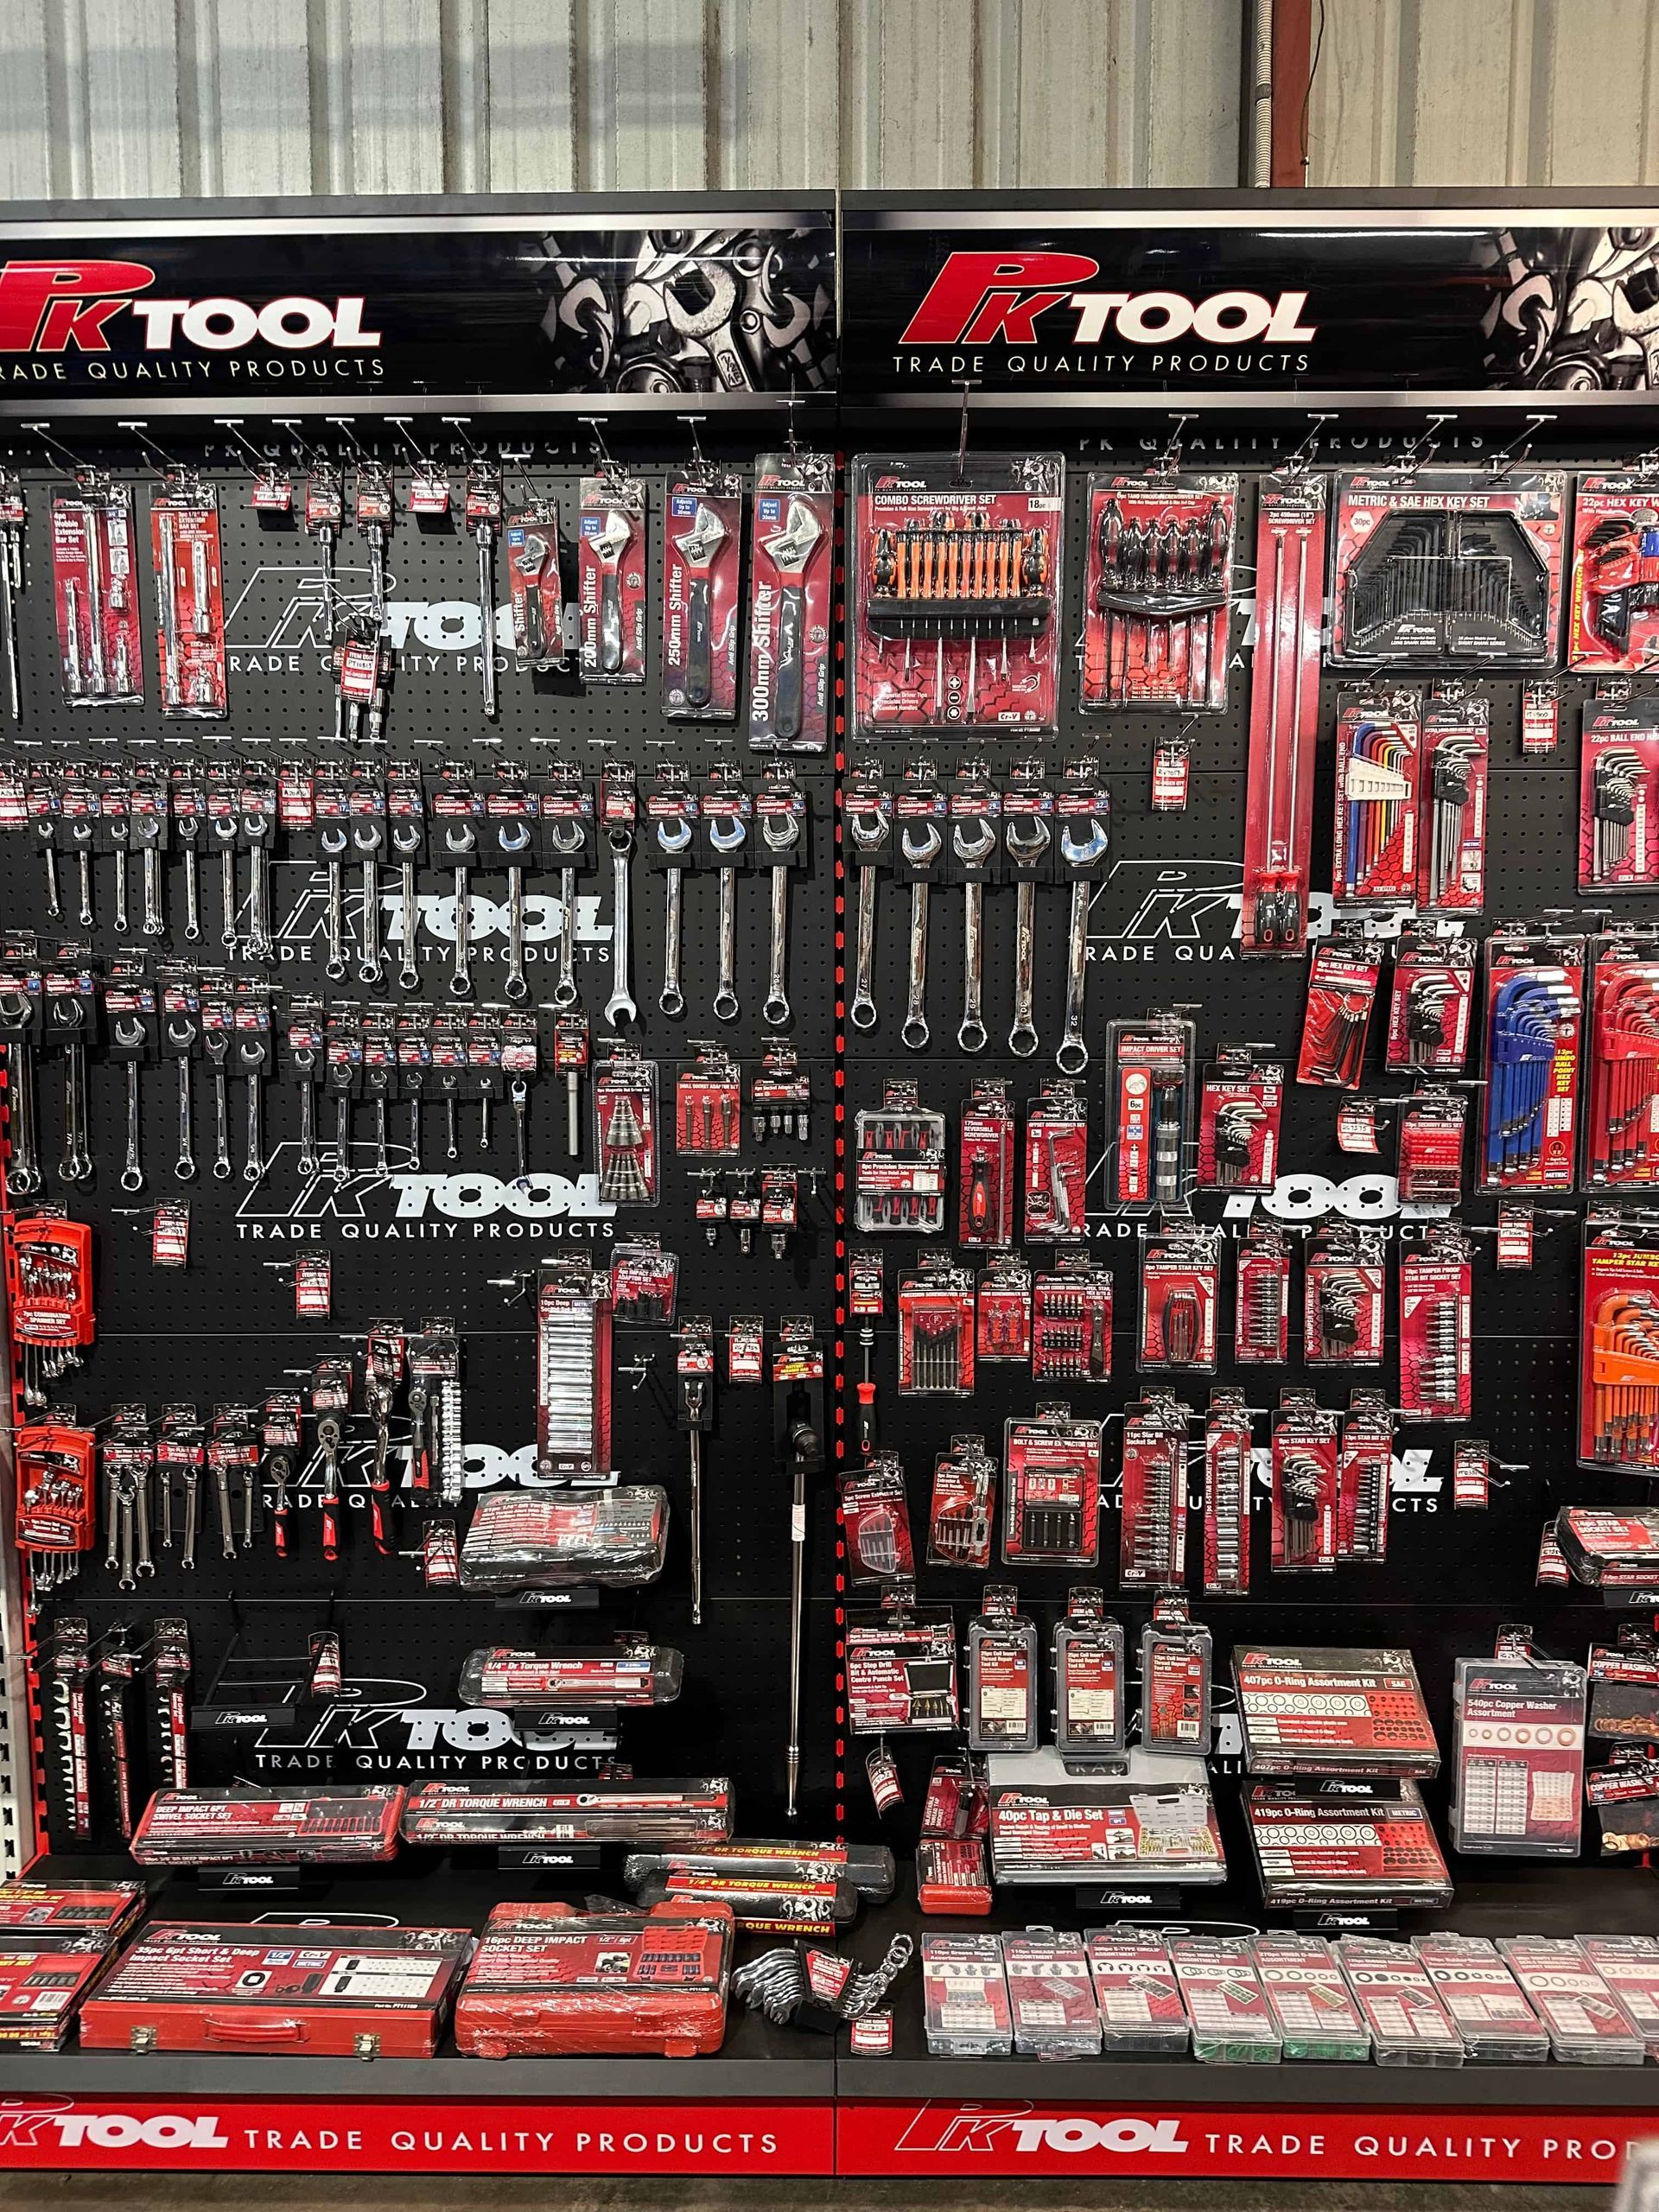 PK Tools Display - Car Parts in Northern Rivers, NSW